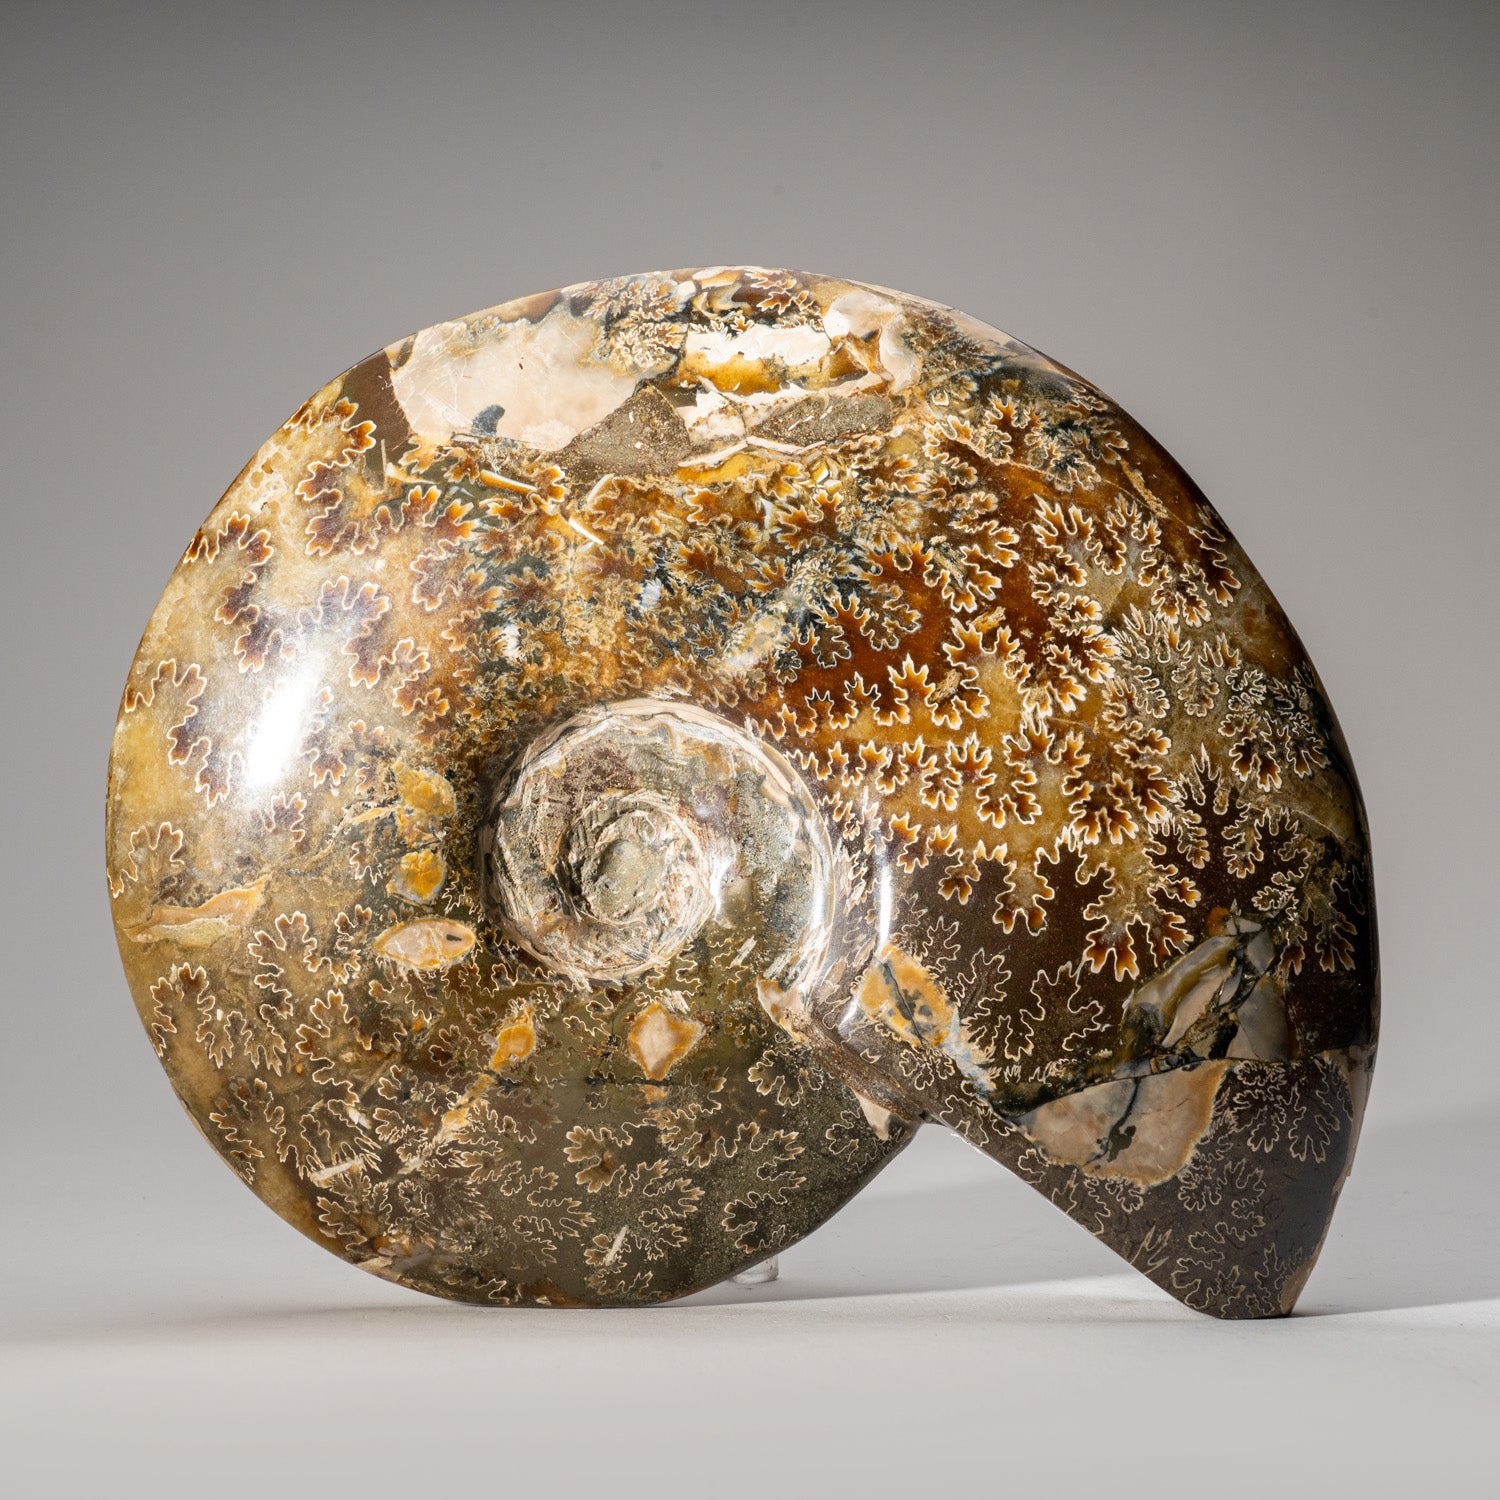 Genuine Natural Calcified Ammonite Fossil (4.6 lbs)